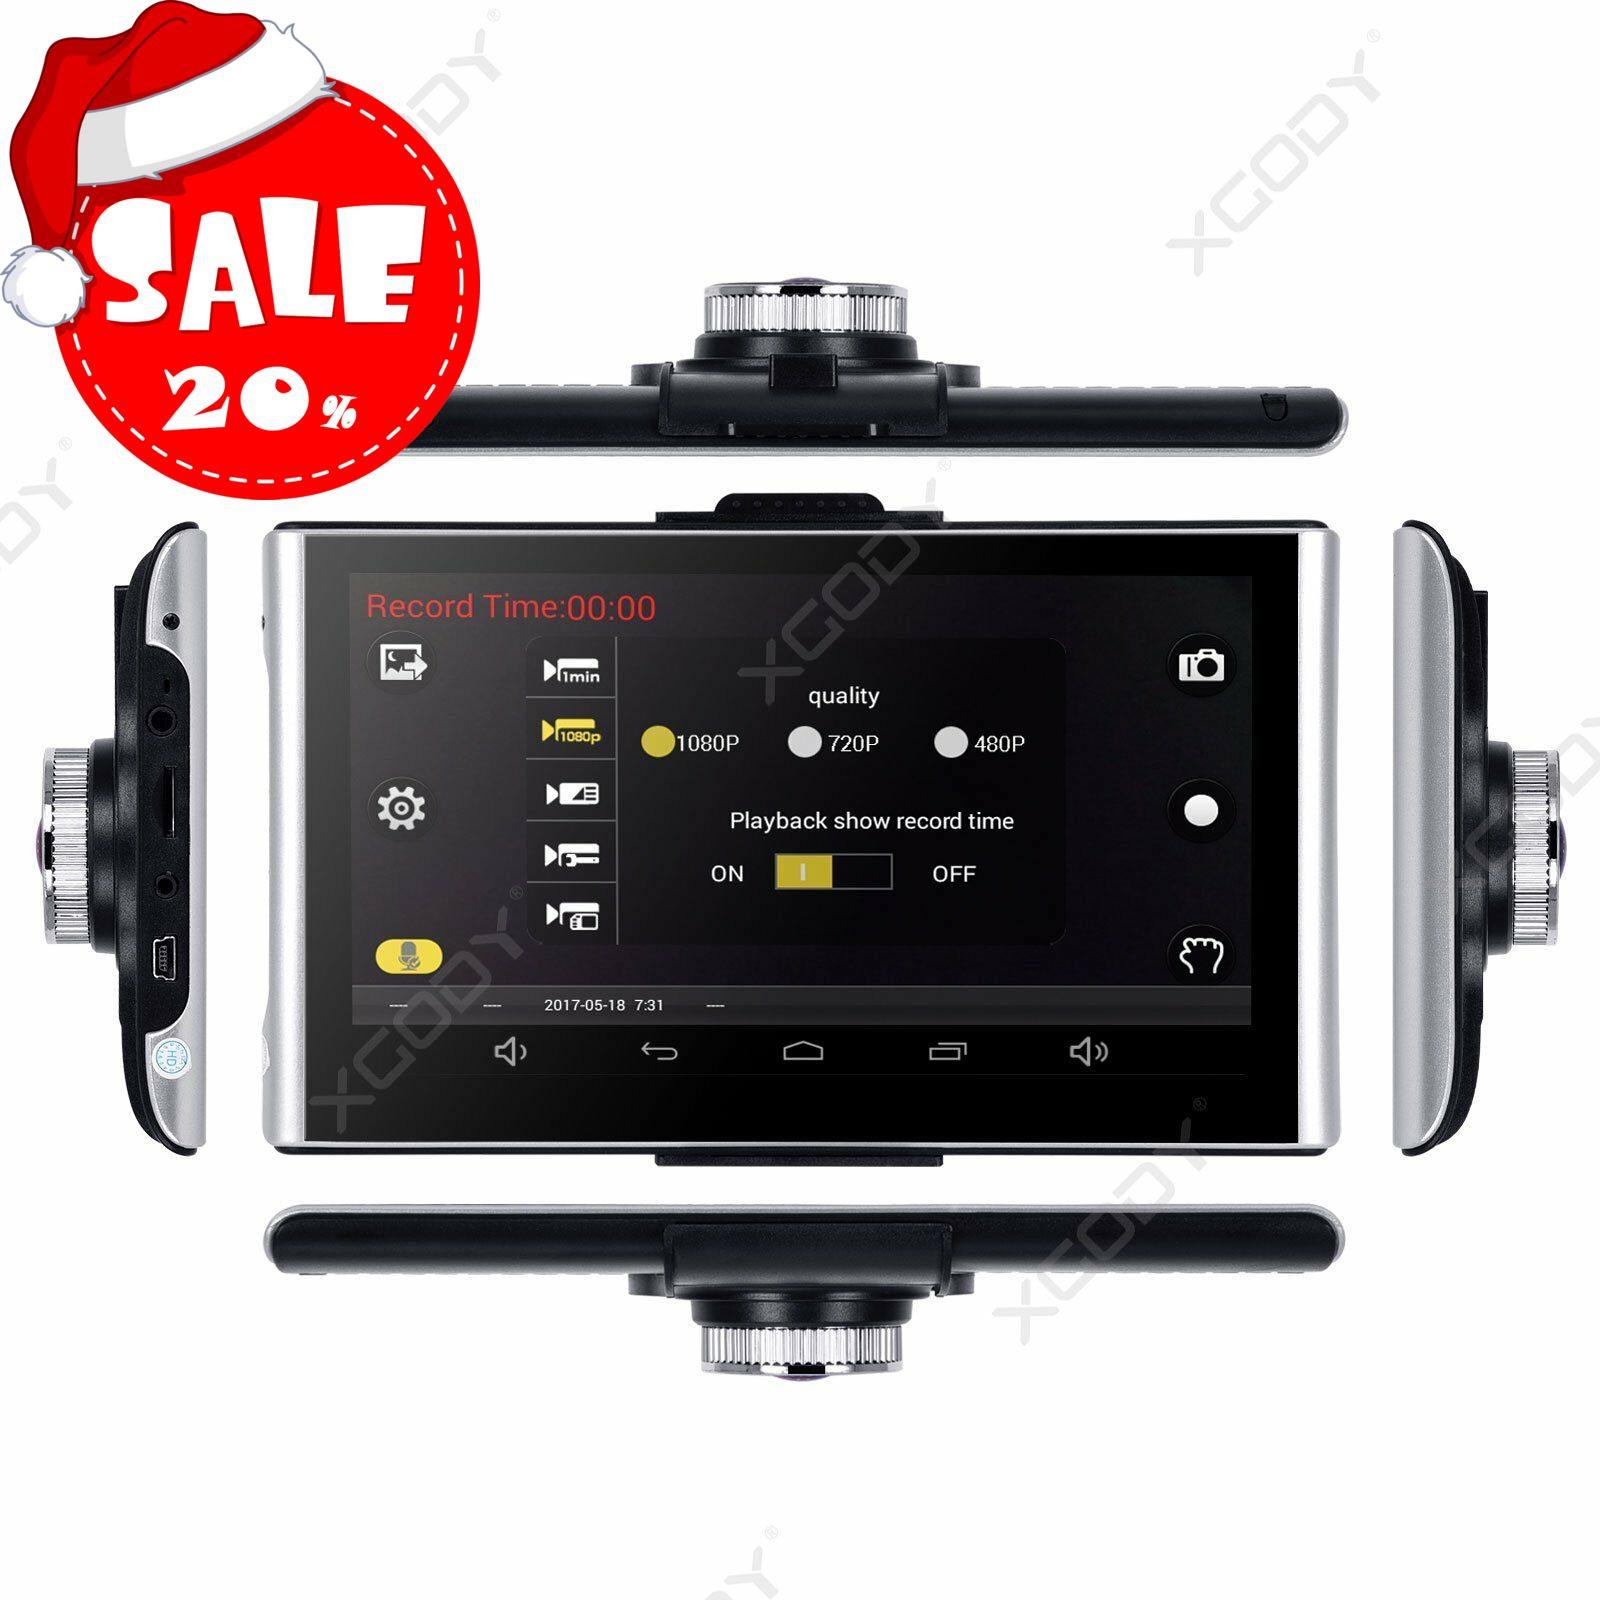 Cost-effective and Most worthwhile XGODY 826 Plus FHD1080P 7" Vehicle Car DVR Video GPS with Android system - XGODY 